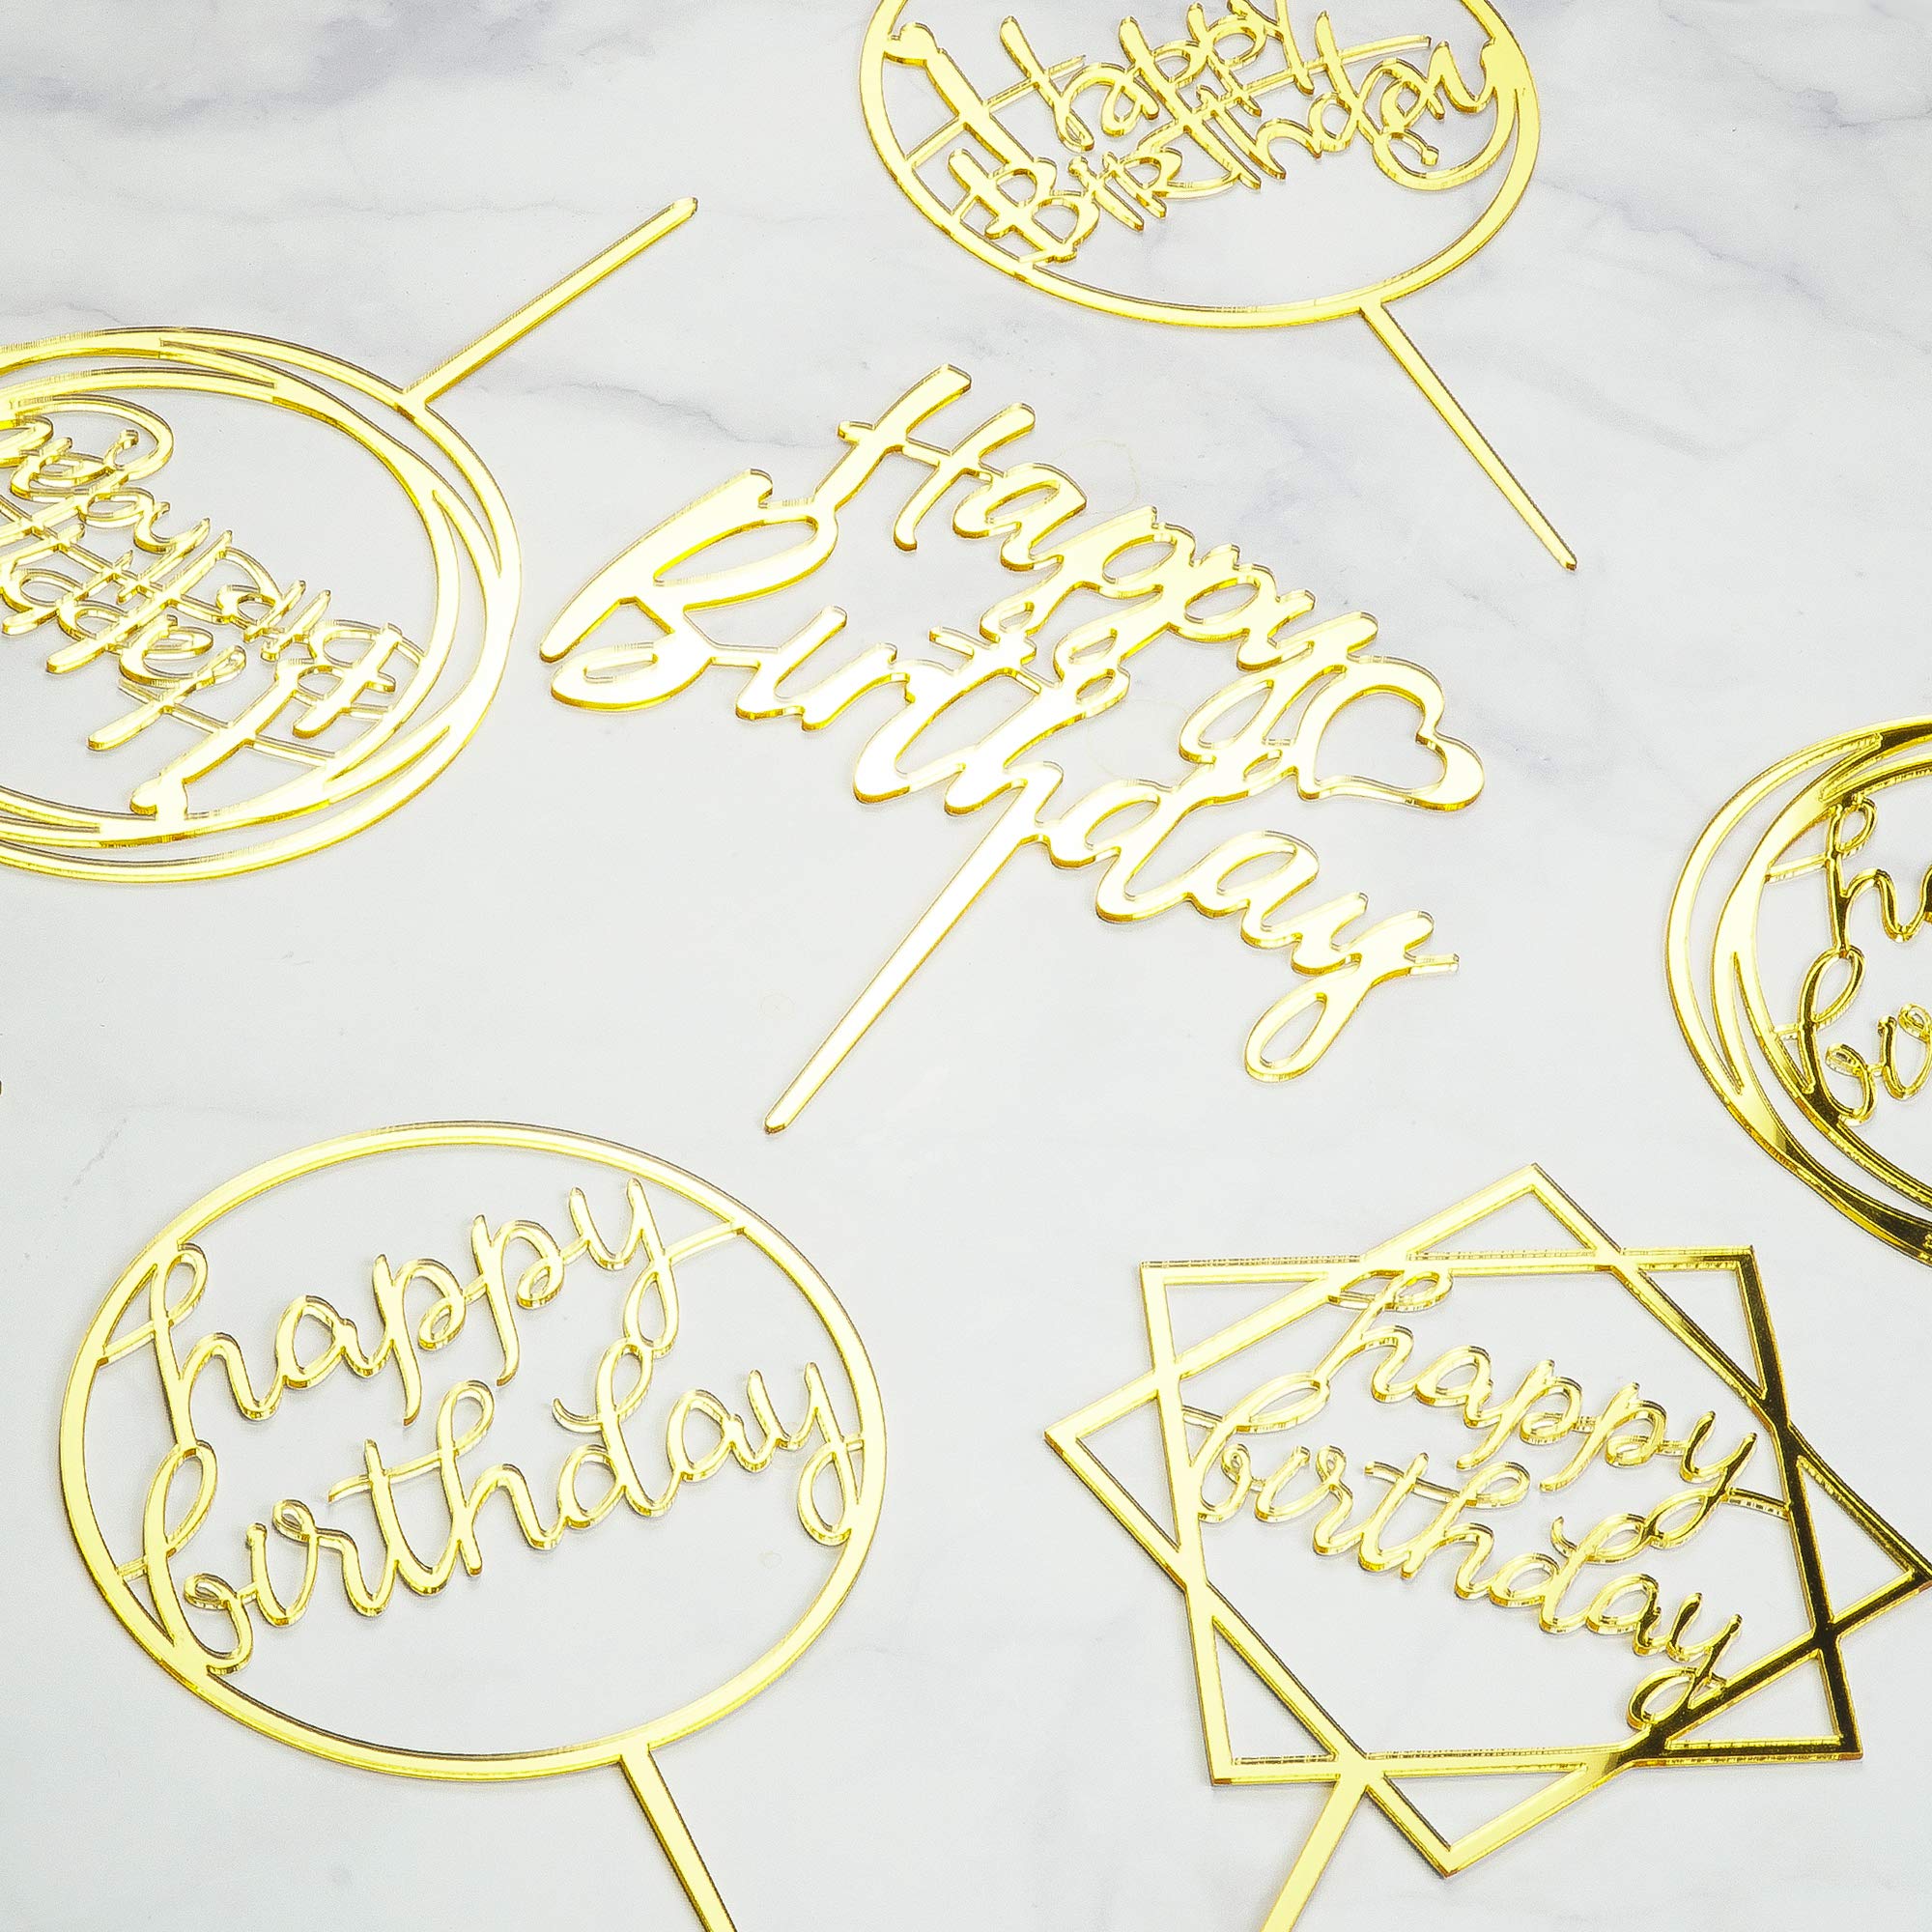 6-Pack Gold Birthday Cake Topper Set, Double-Sided Glitter, Acrylic Happy Birthday Cake Toppers/Cupcake Toppers, Birthday Decorations for Children or Adults.